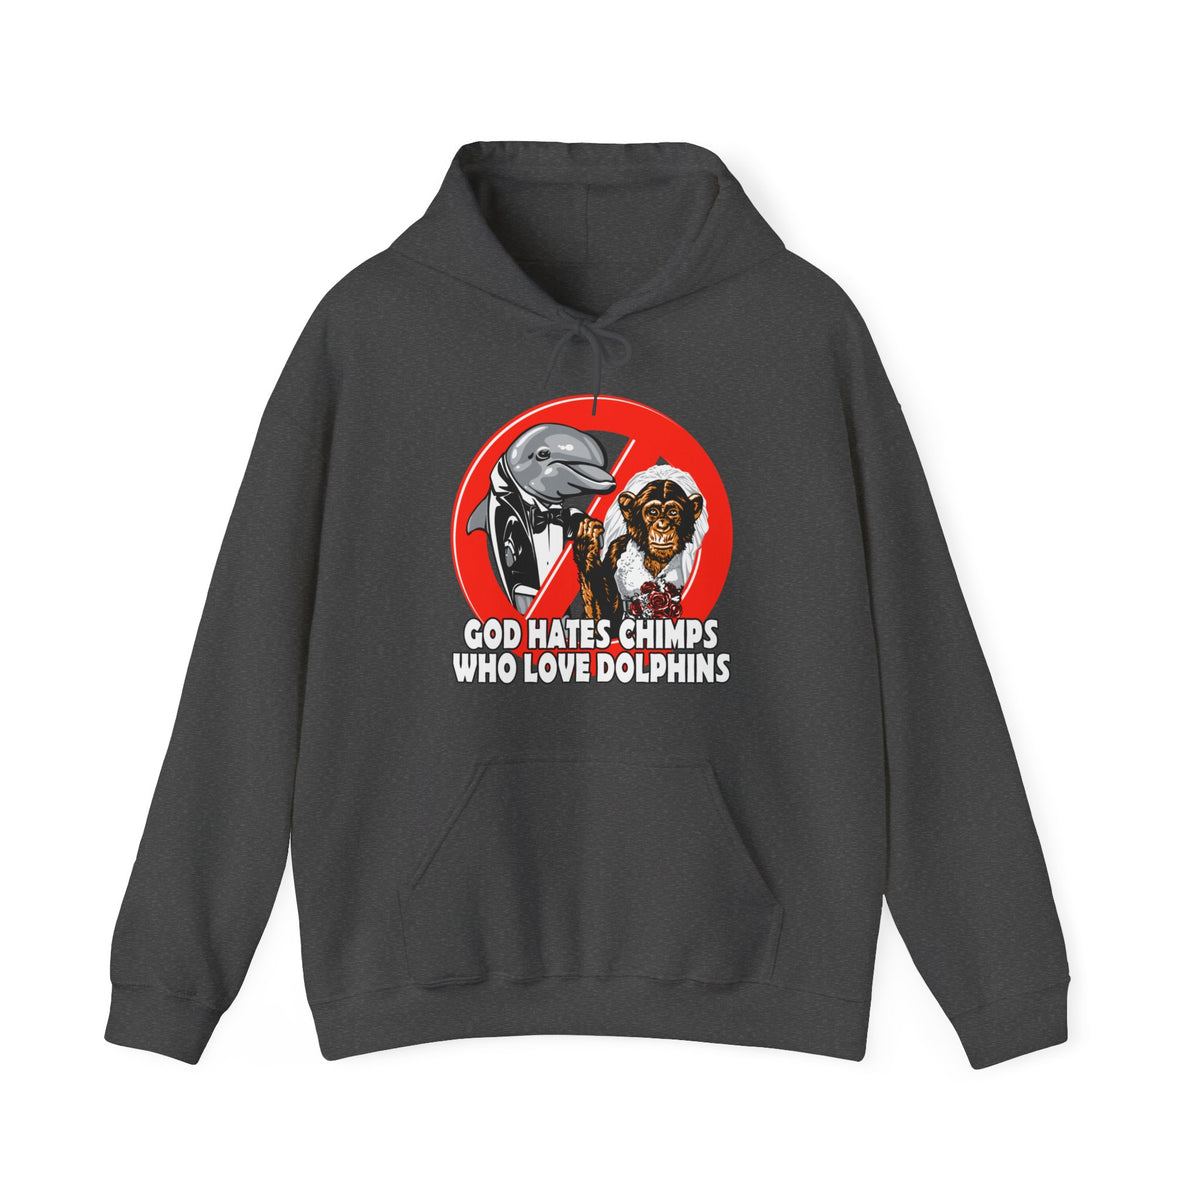 God Hates Chimps Who Love Dolphins - Hoodie